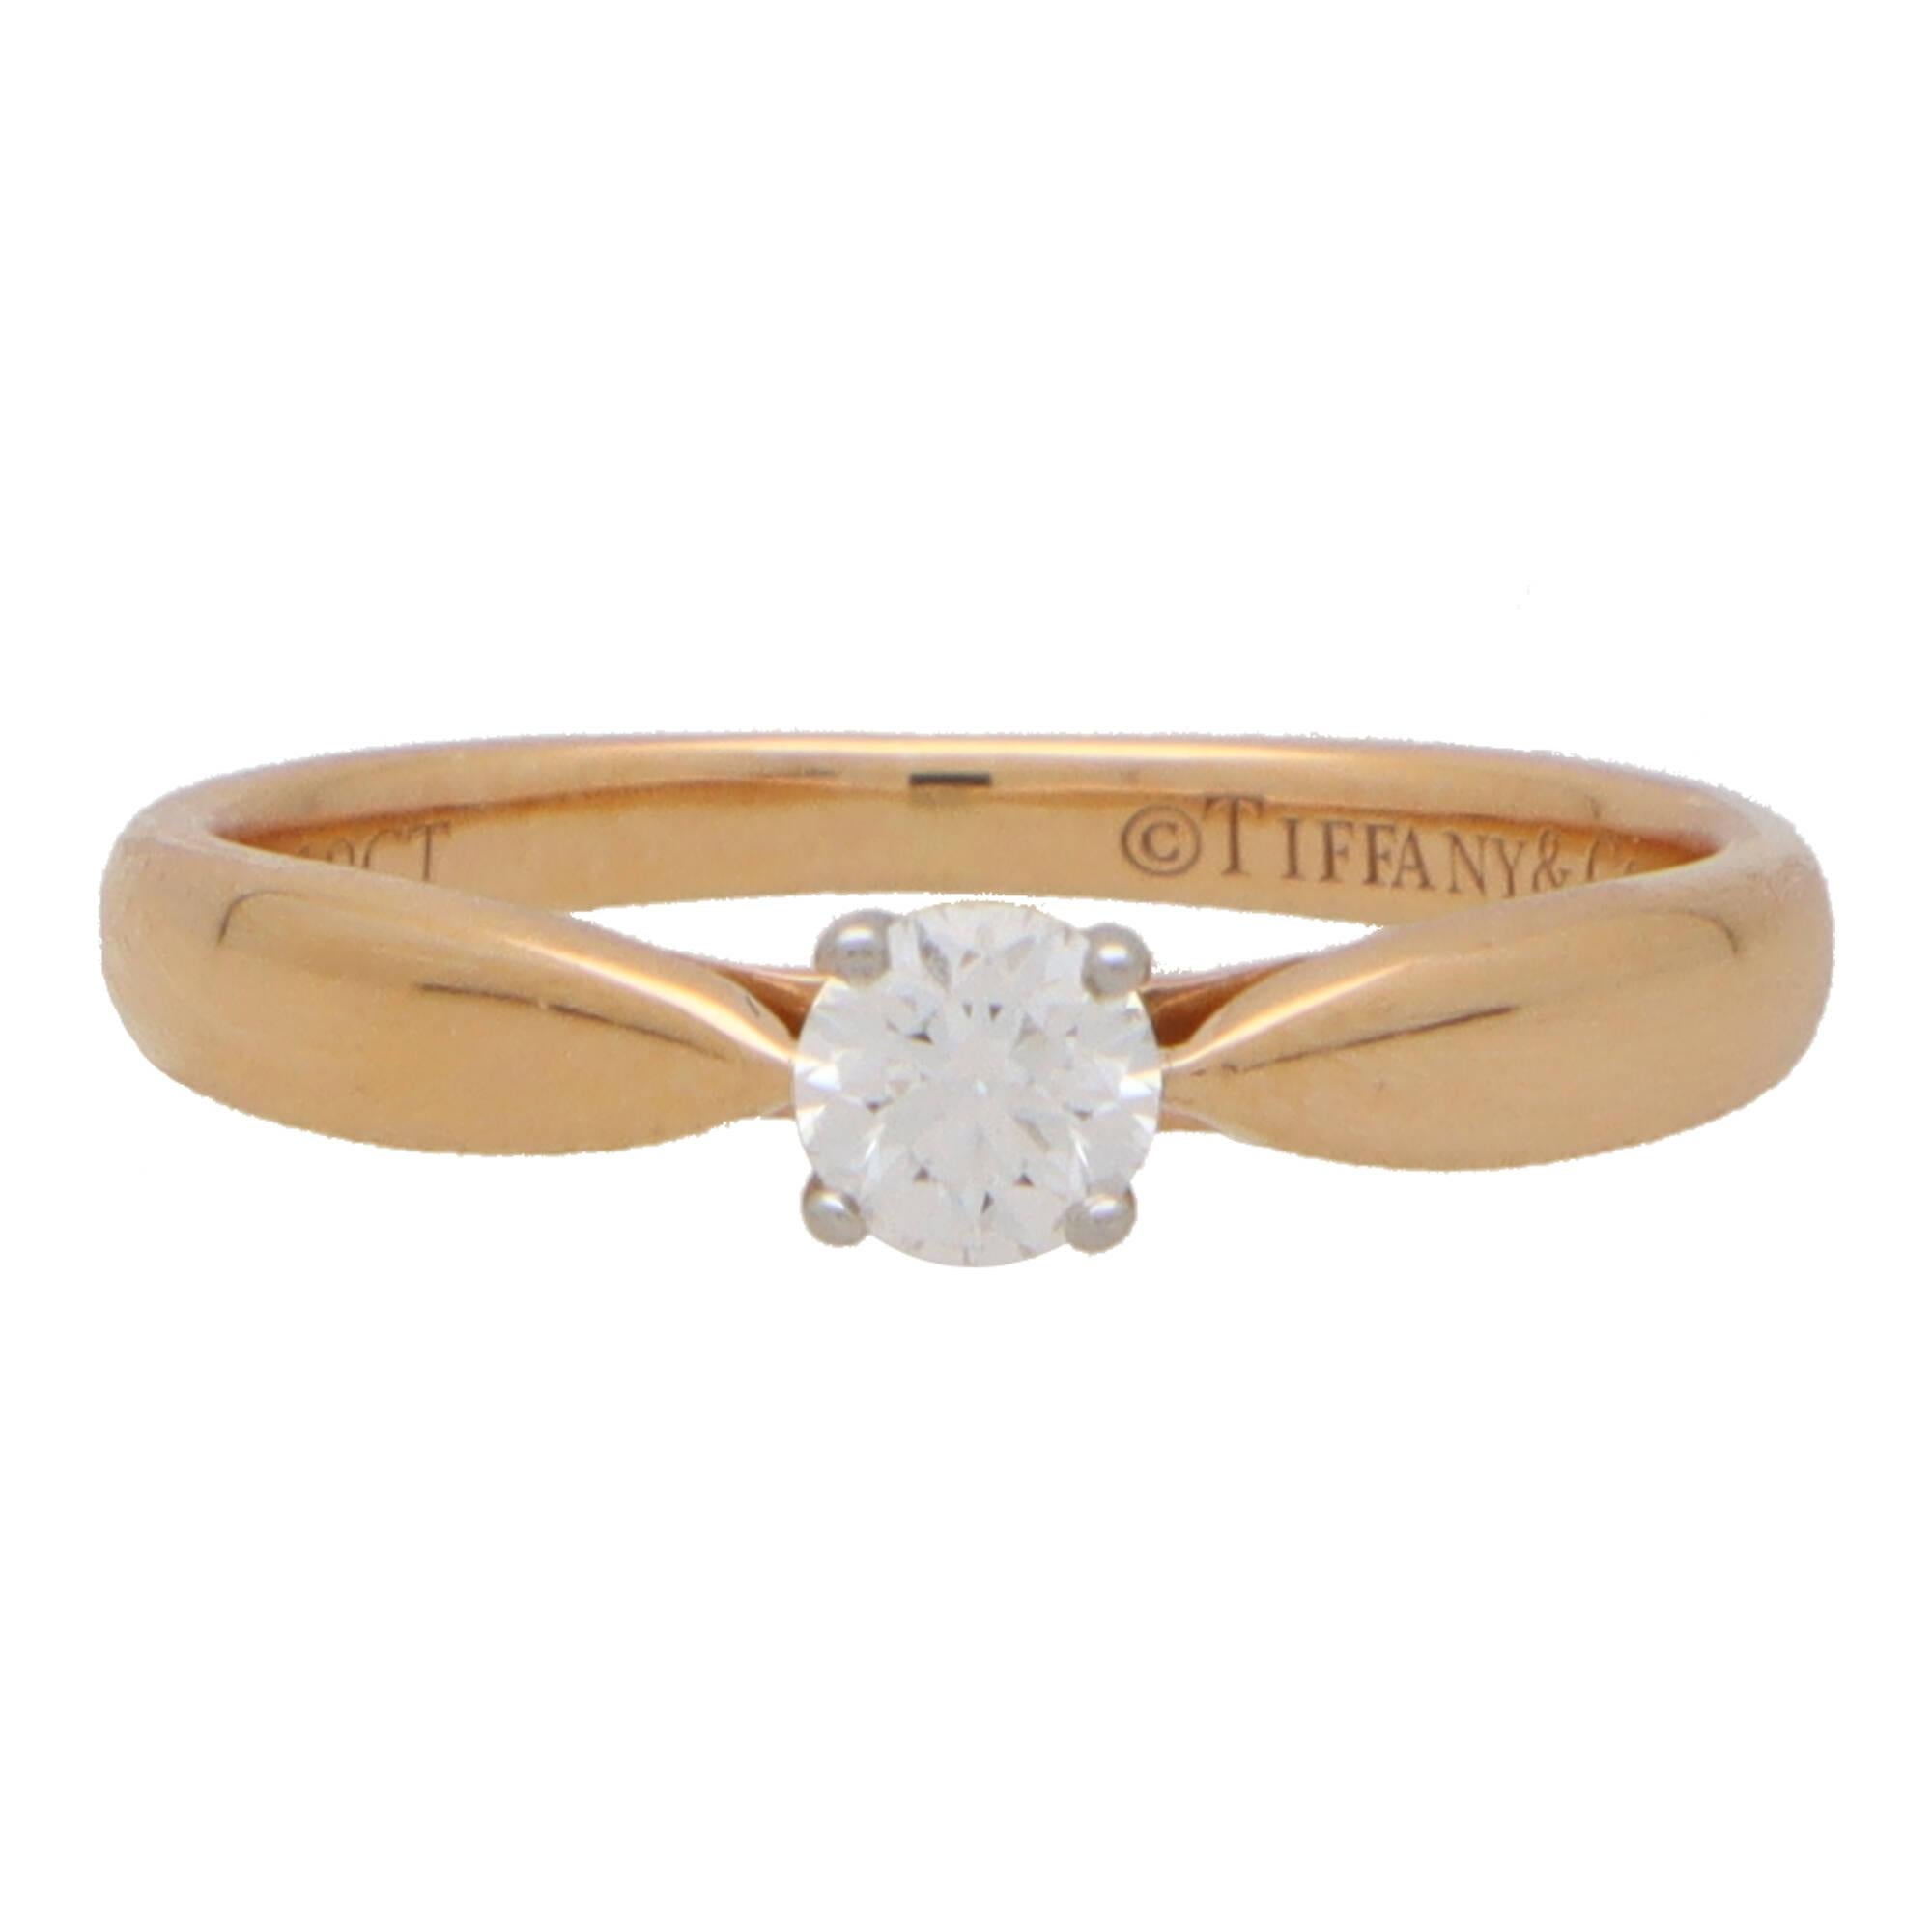 Modern Vintage Tiffany & Co. Harmony Diamond Ring in Rose Gold and Platinum